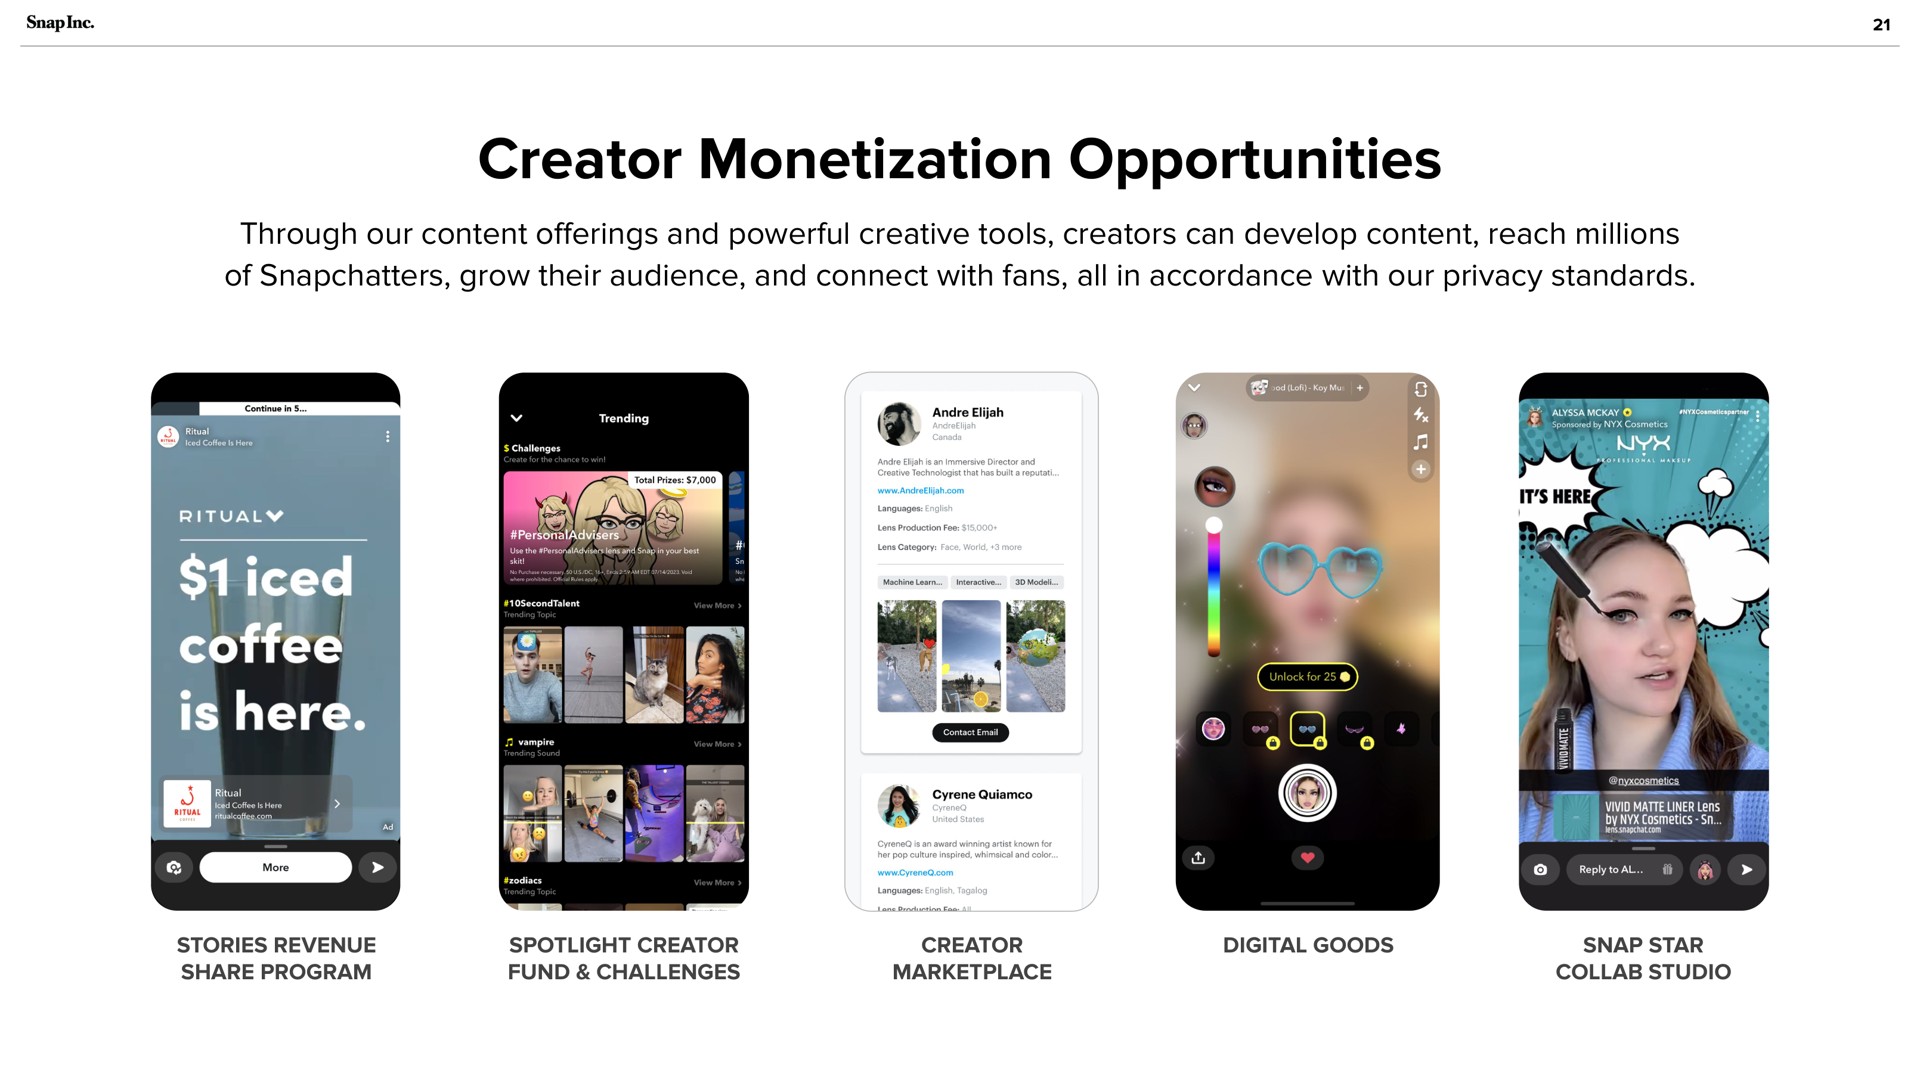 creator monetization opportunities sliced coffee is here | Snap Inc